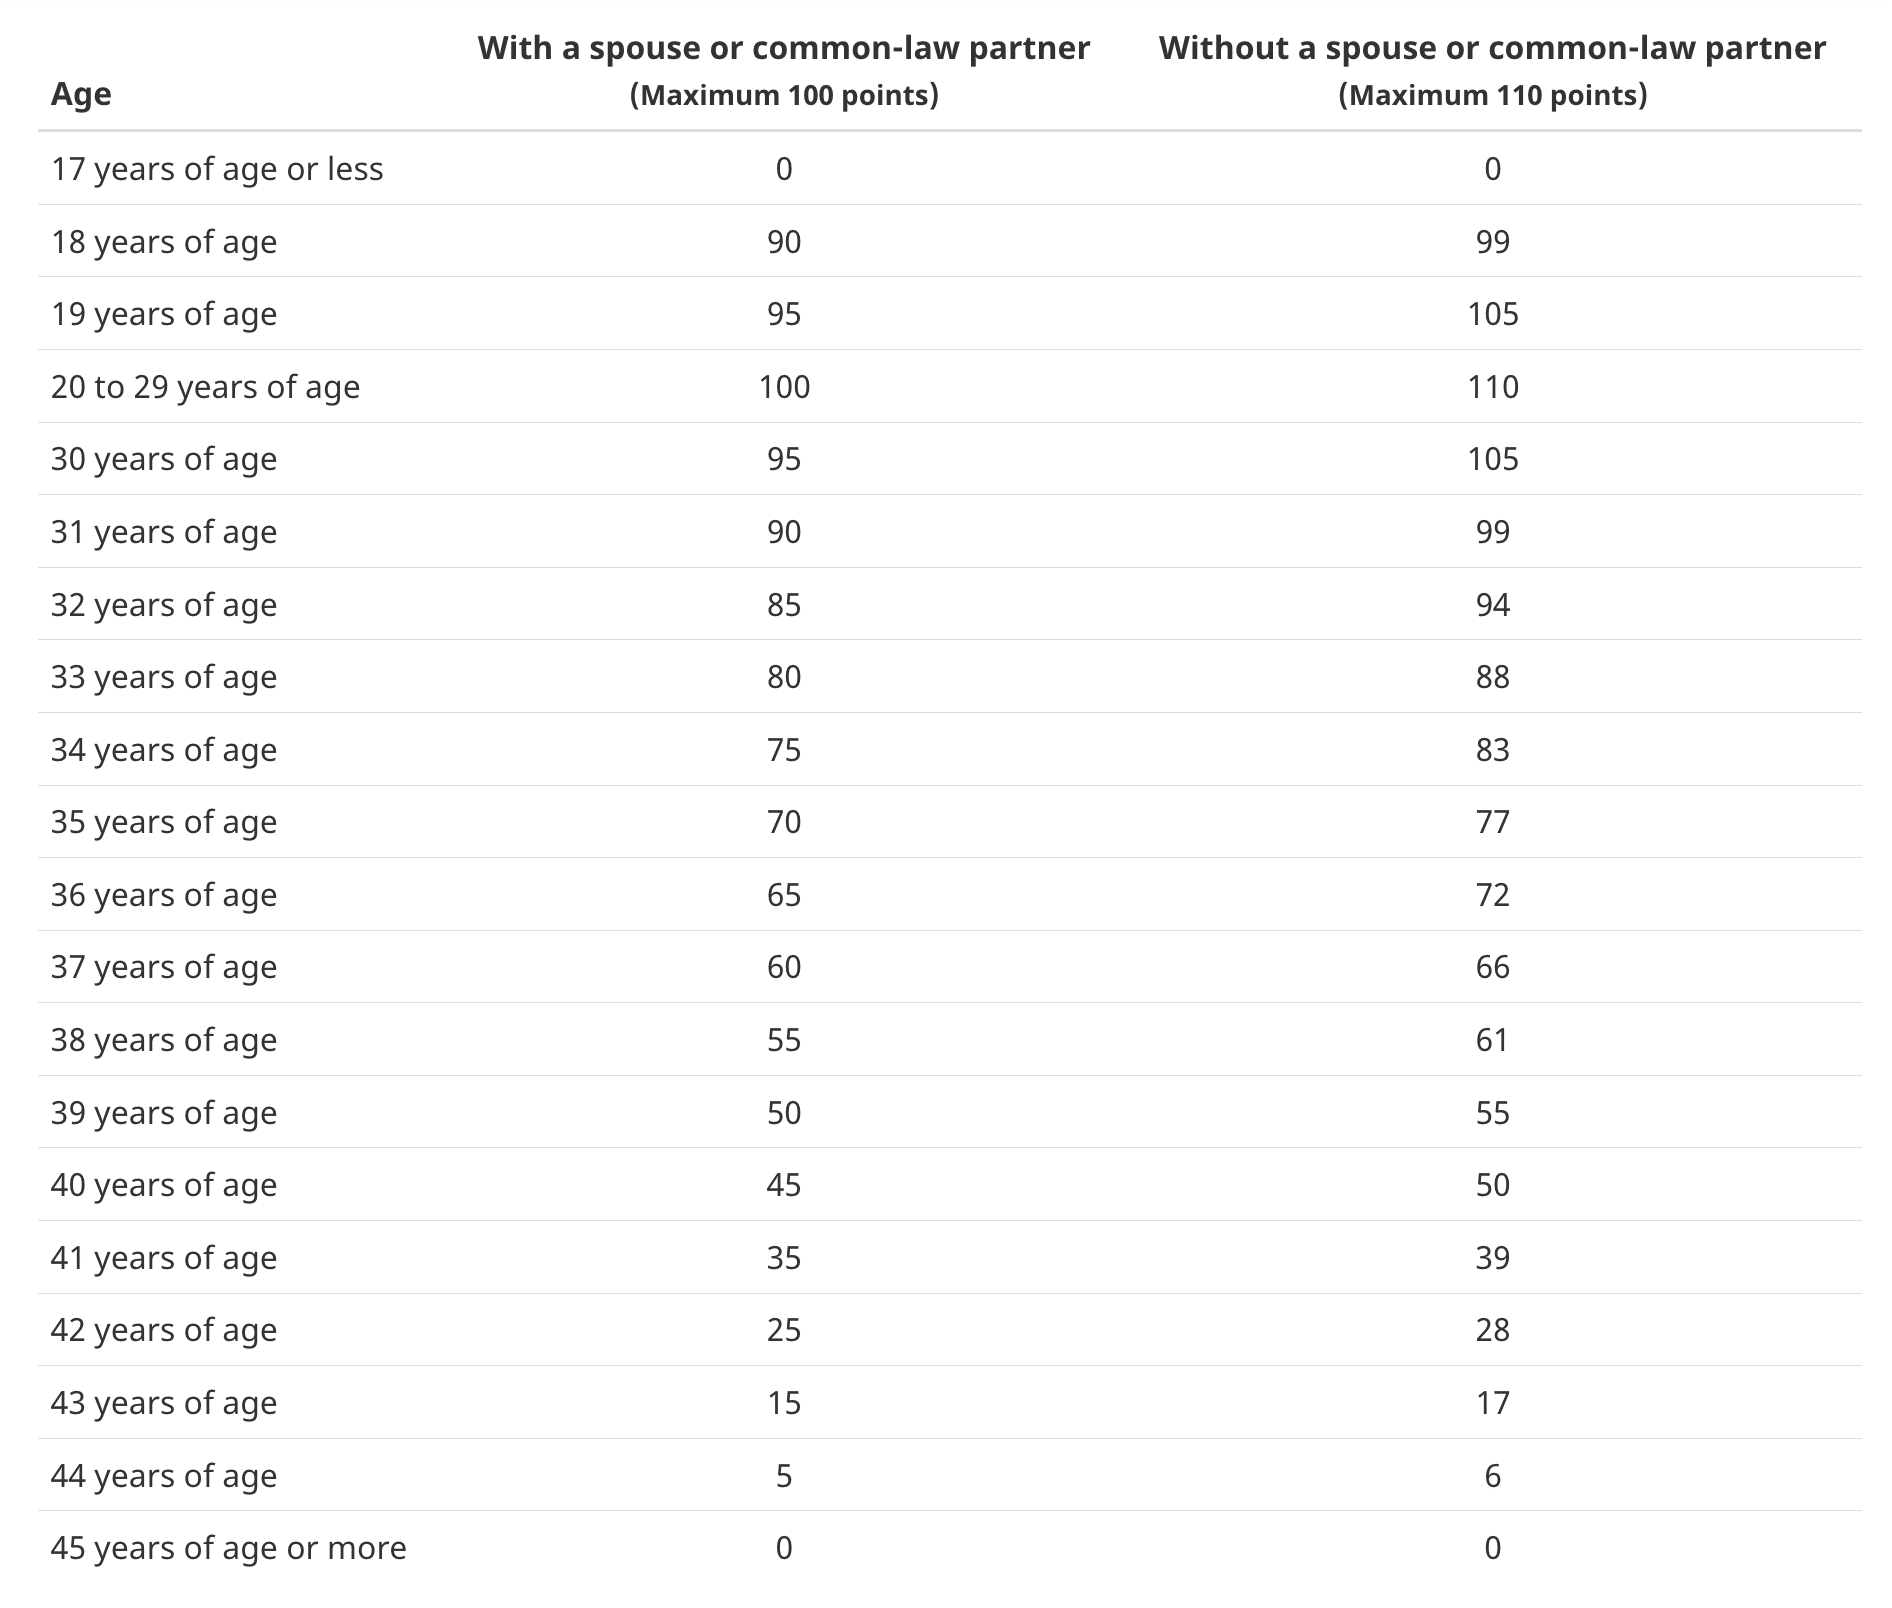 A table denoting how age is scored in the CRS, for those with an accompanying significant other, or not.